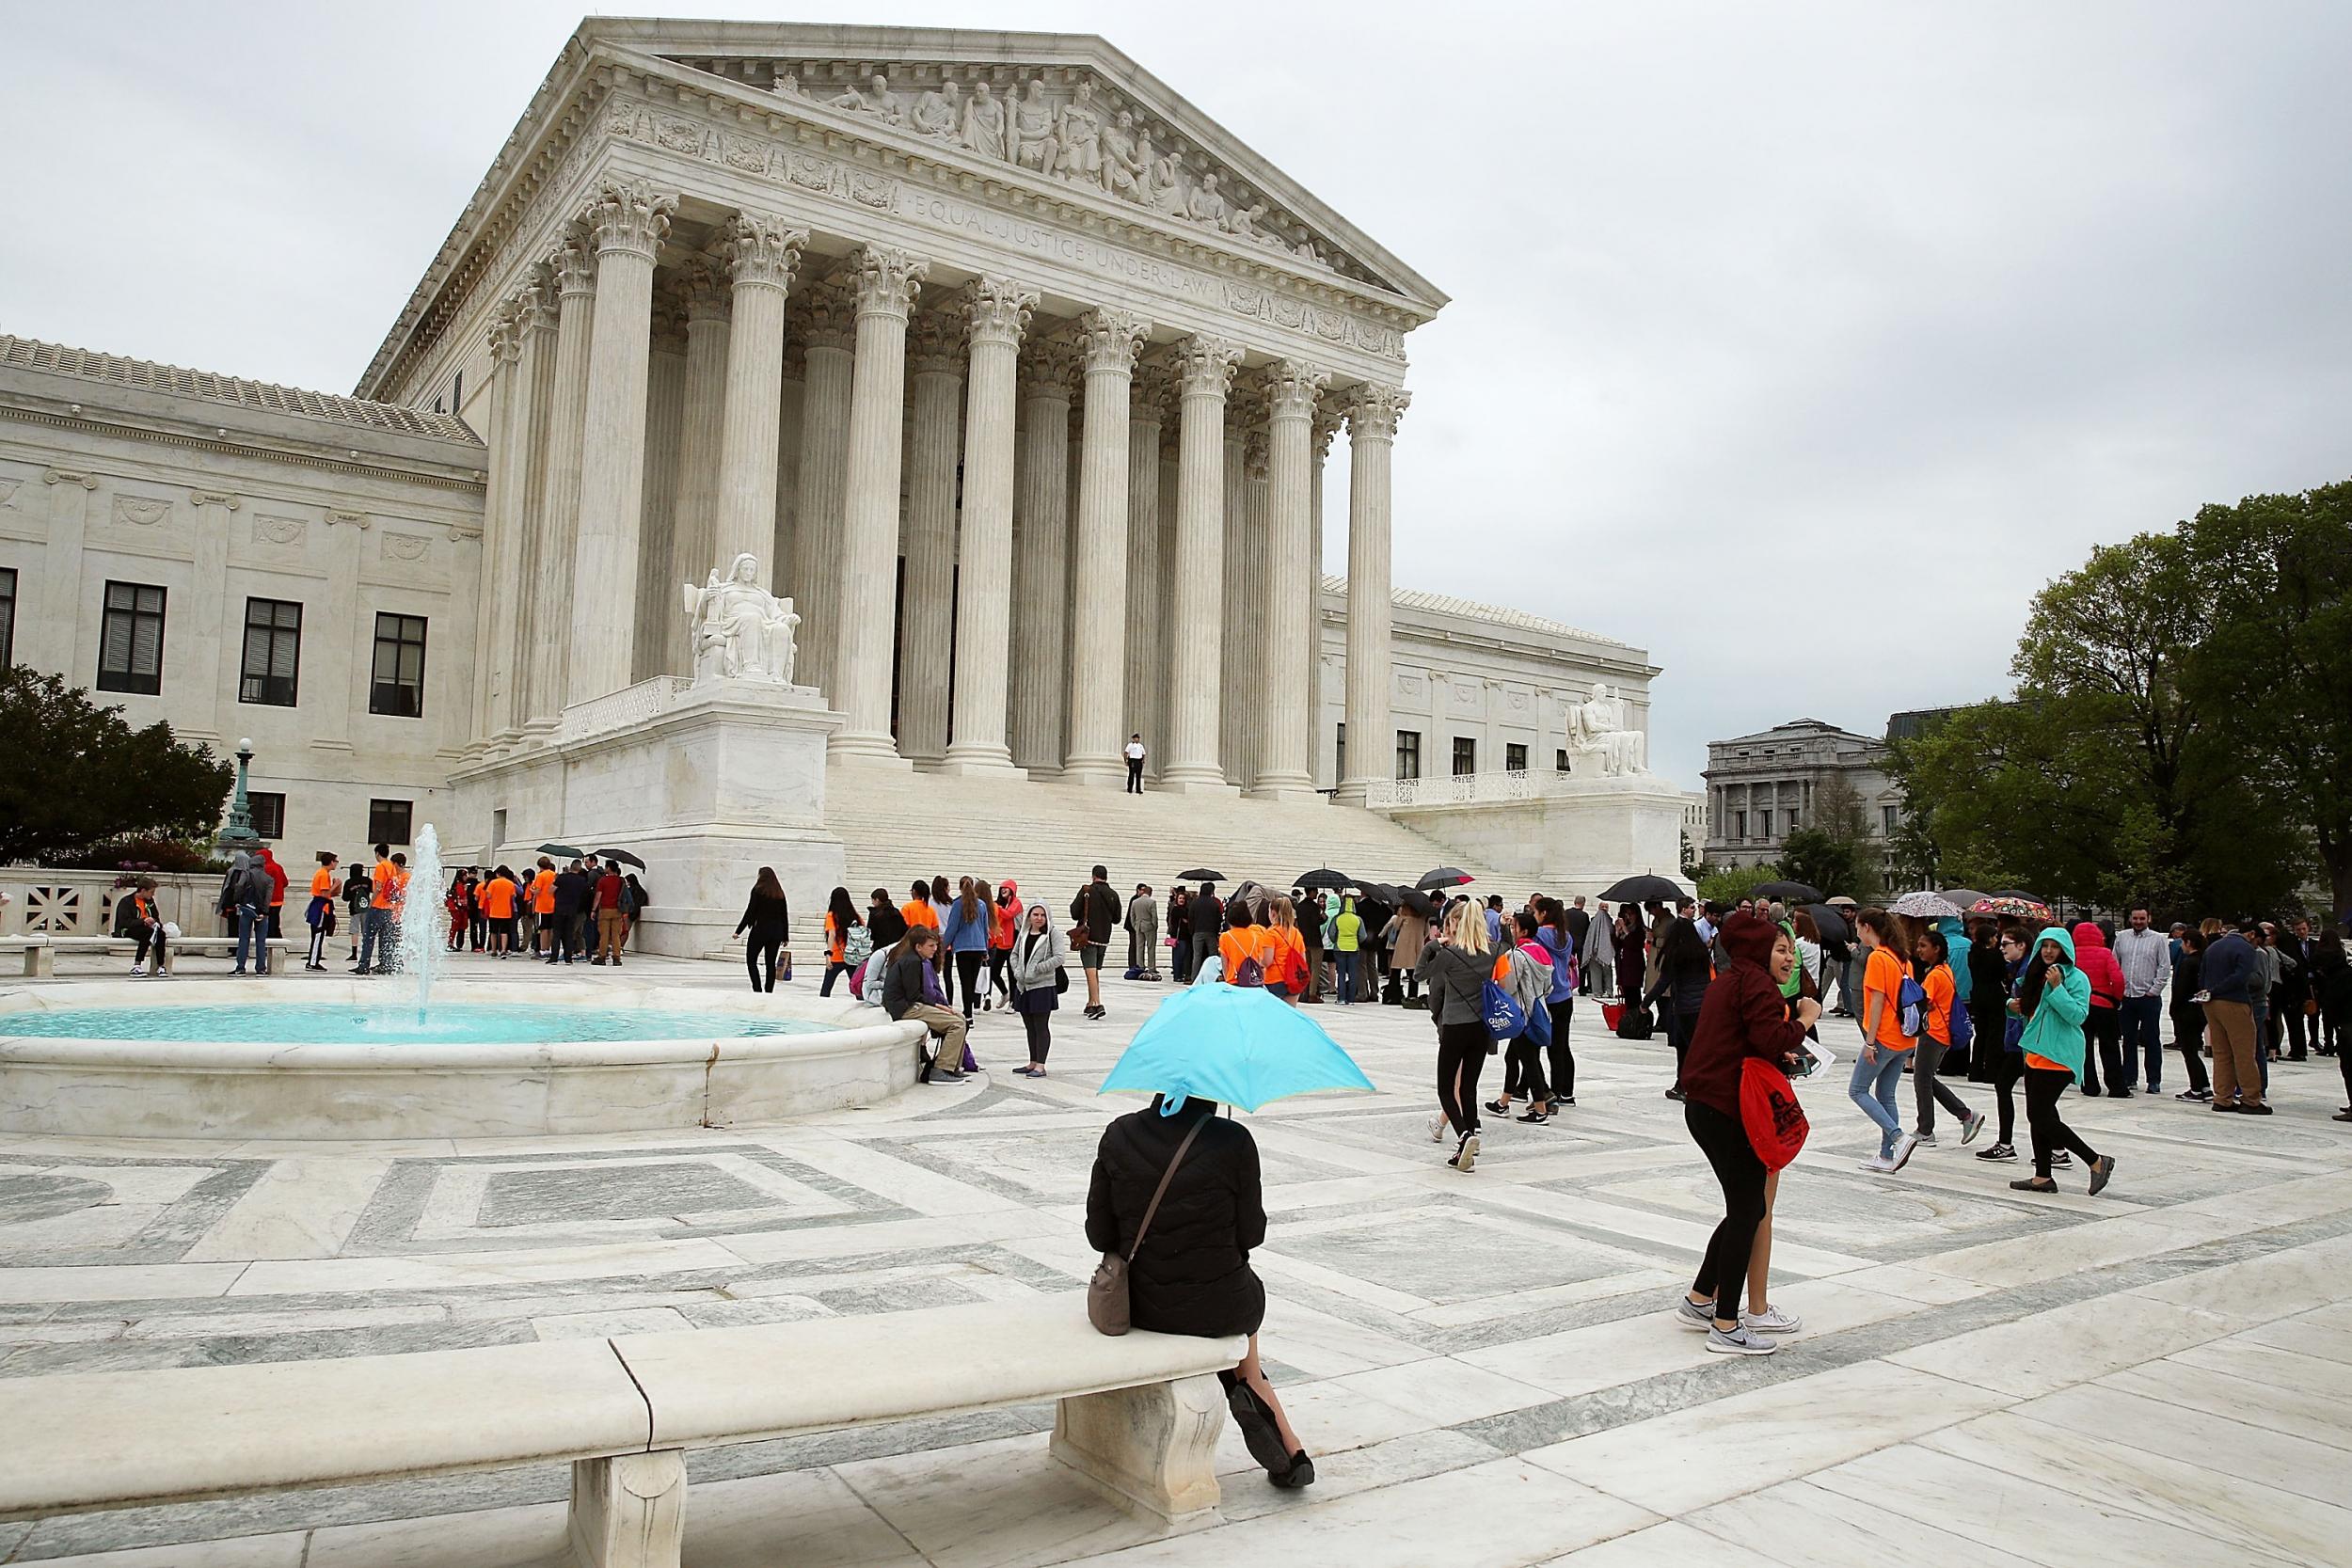 The Supreme Court has struck down a voter ID law that discriminated against African Americans